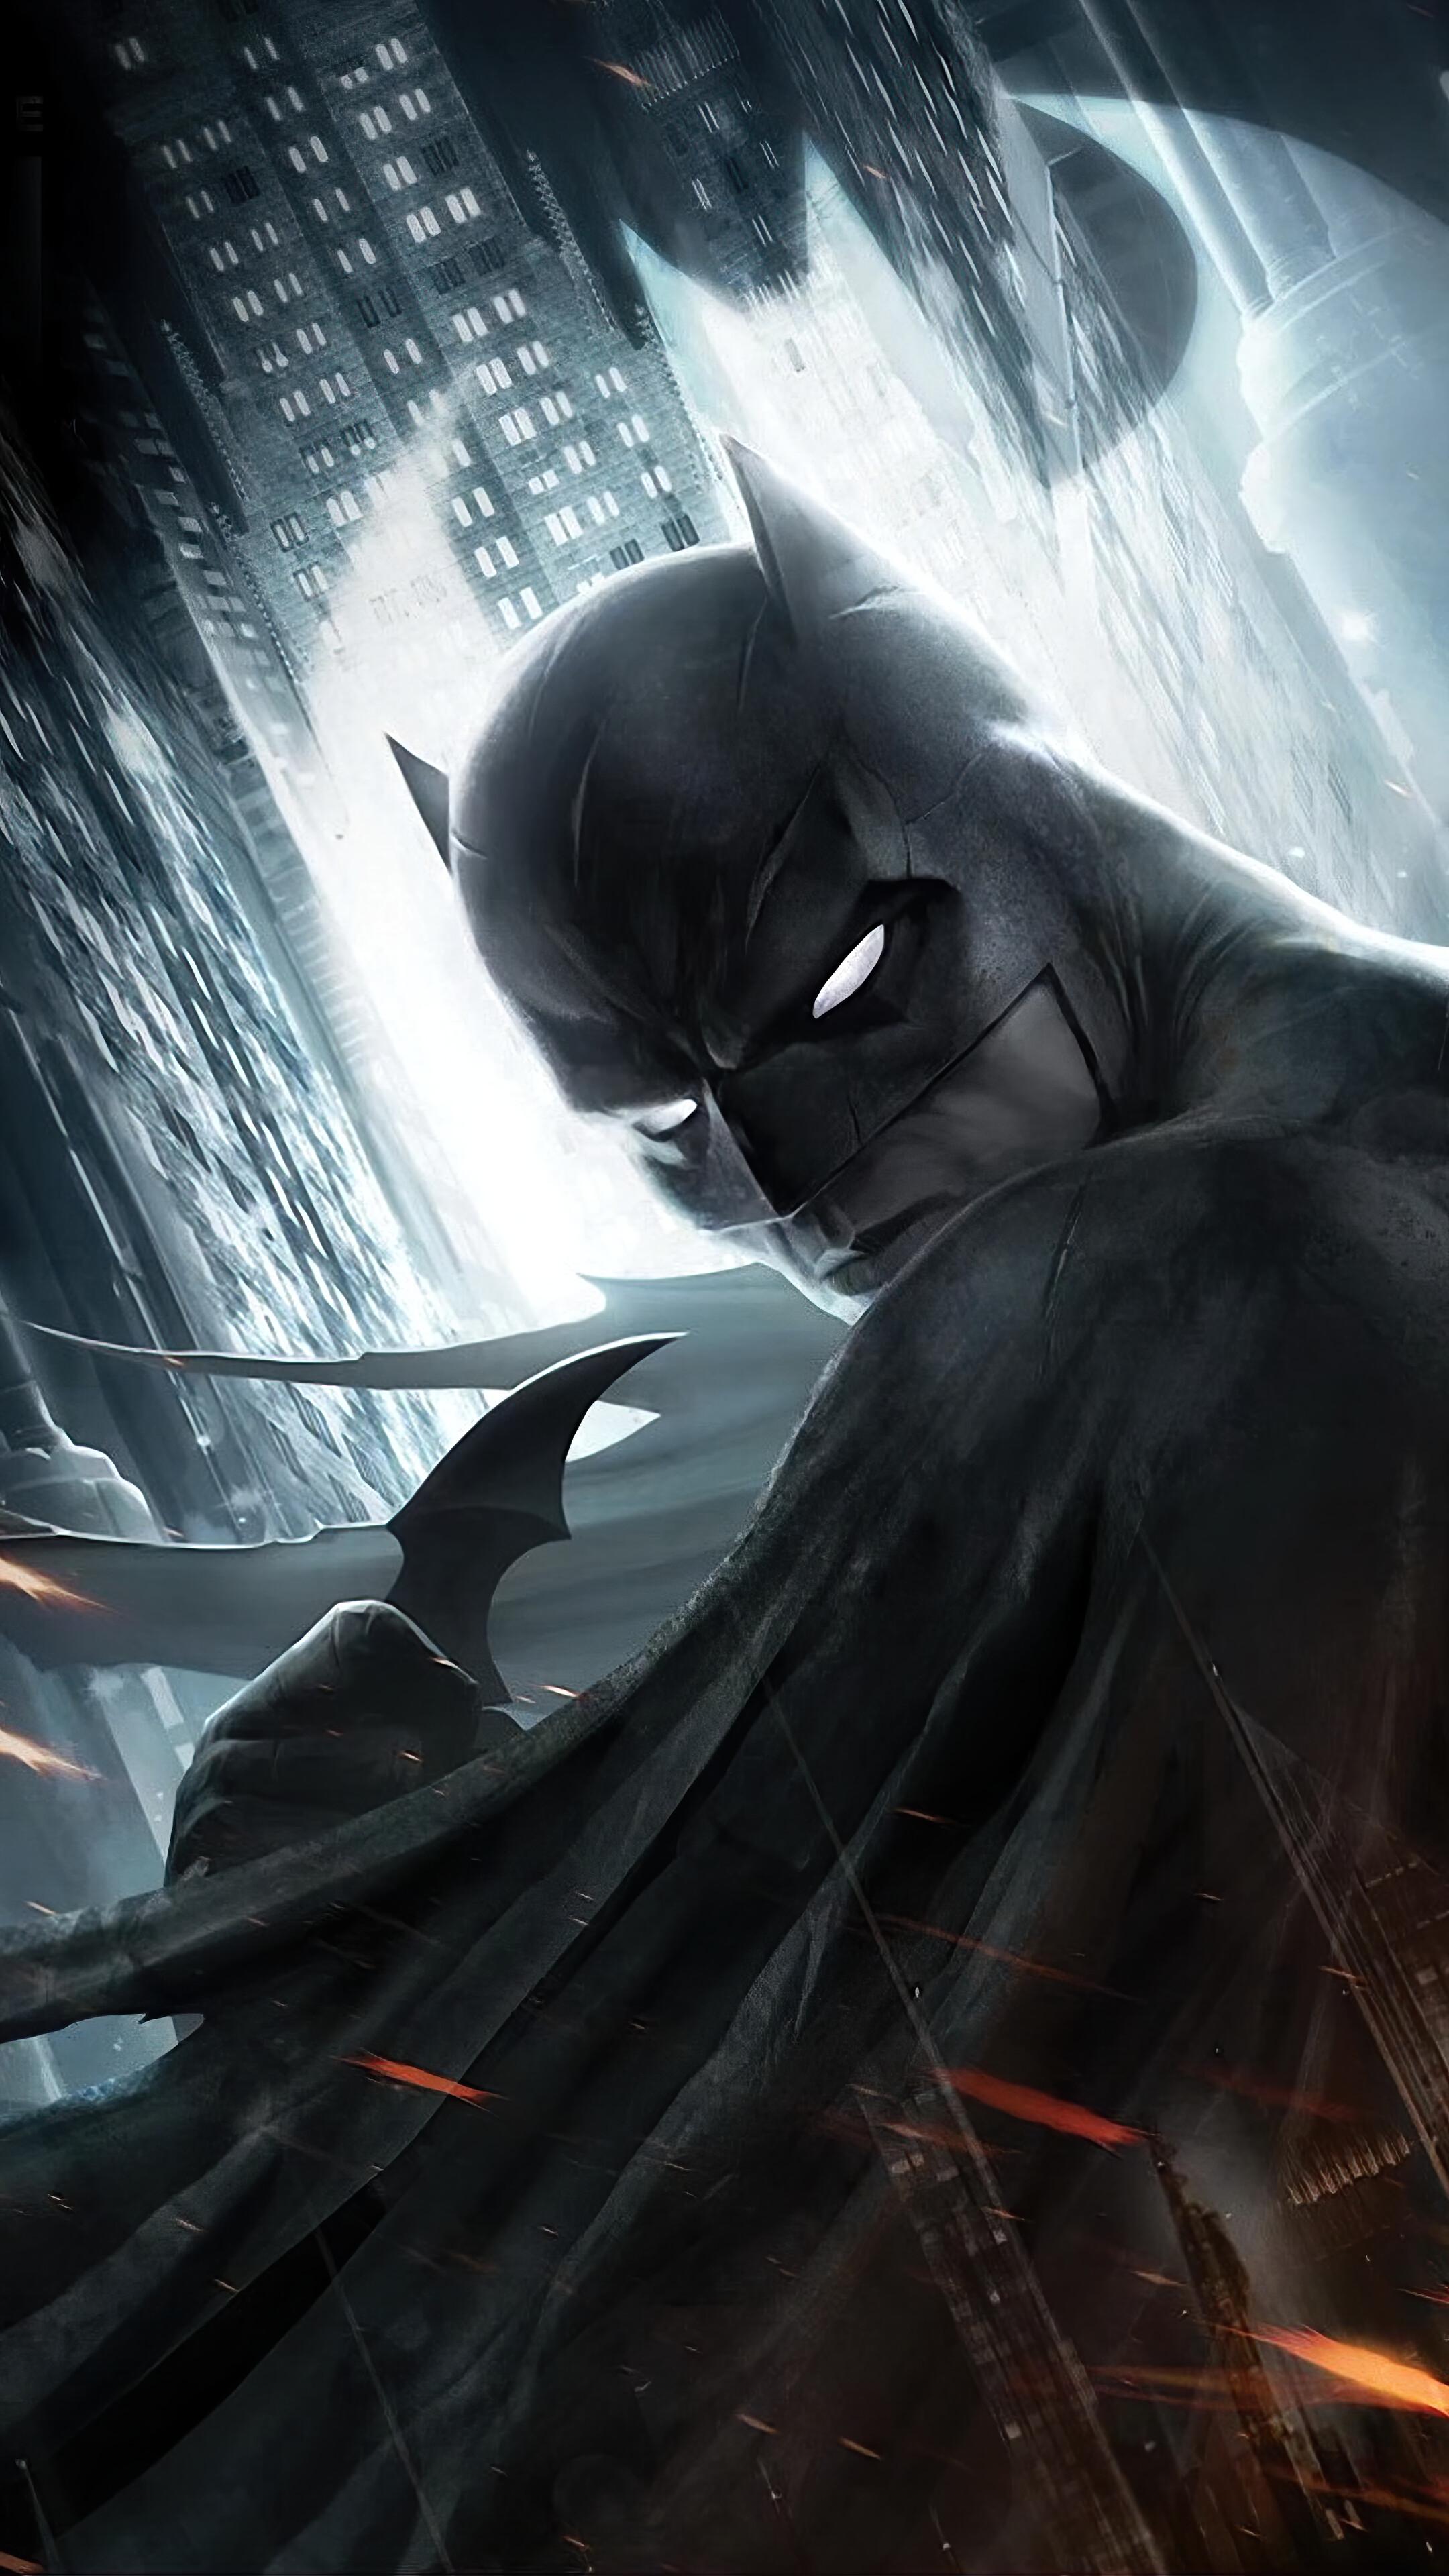 Limited Edition Batman HD Wallpaper for Android